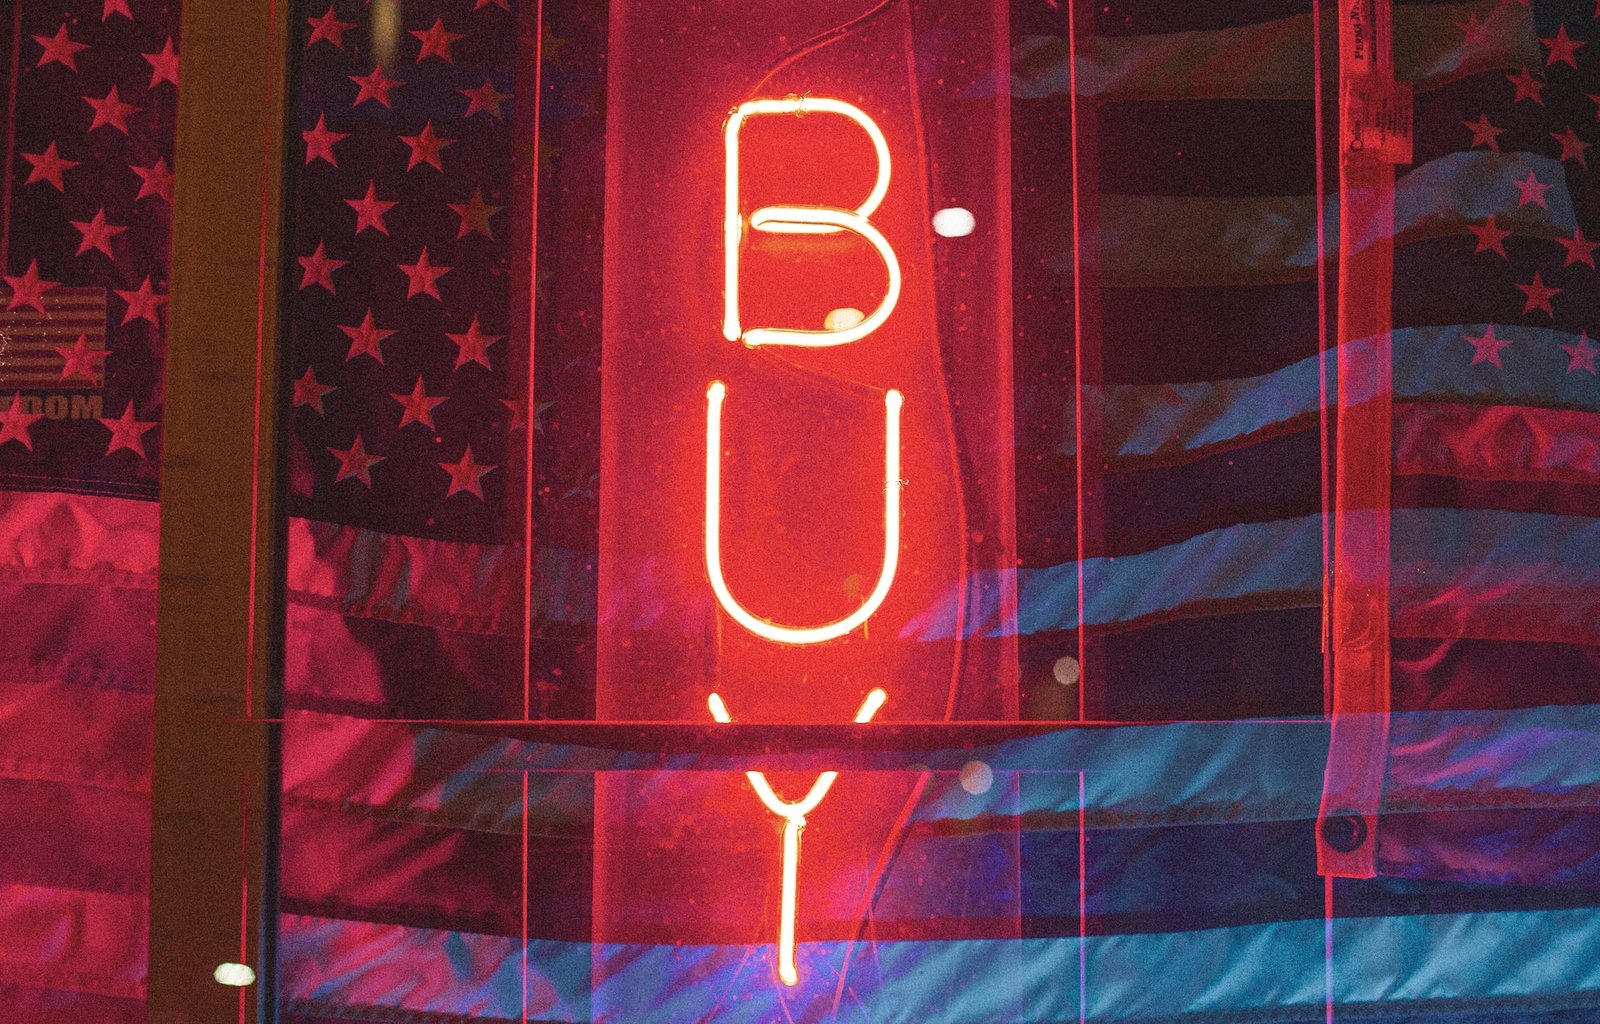 neon "buy" sign in front of american flag